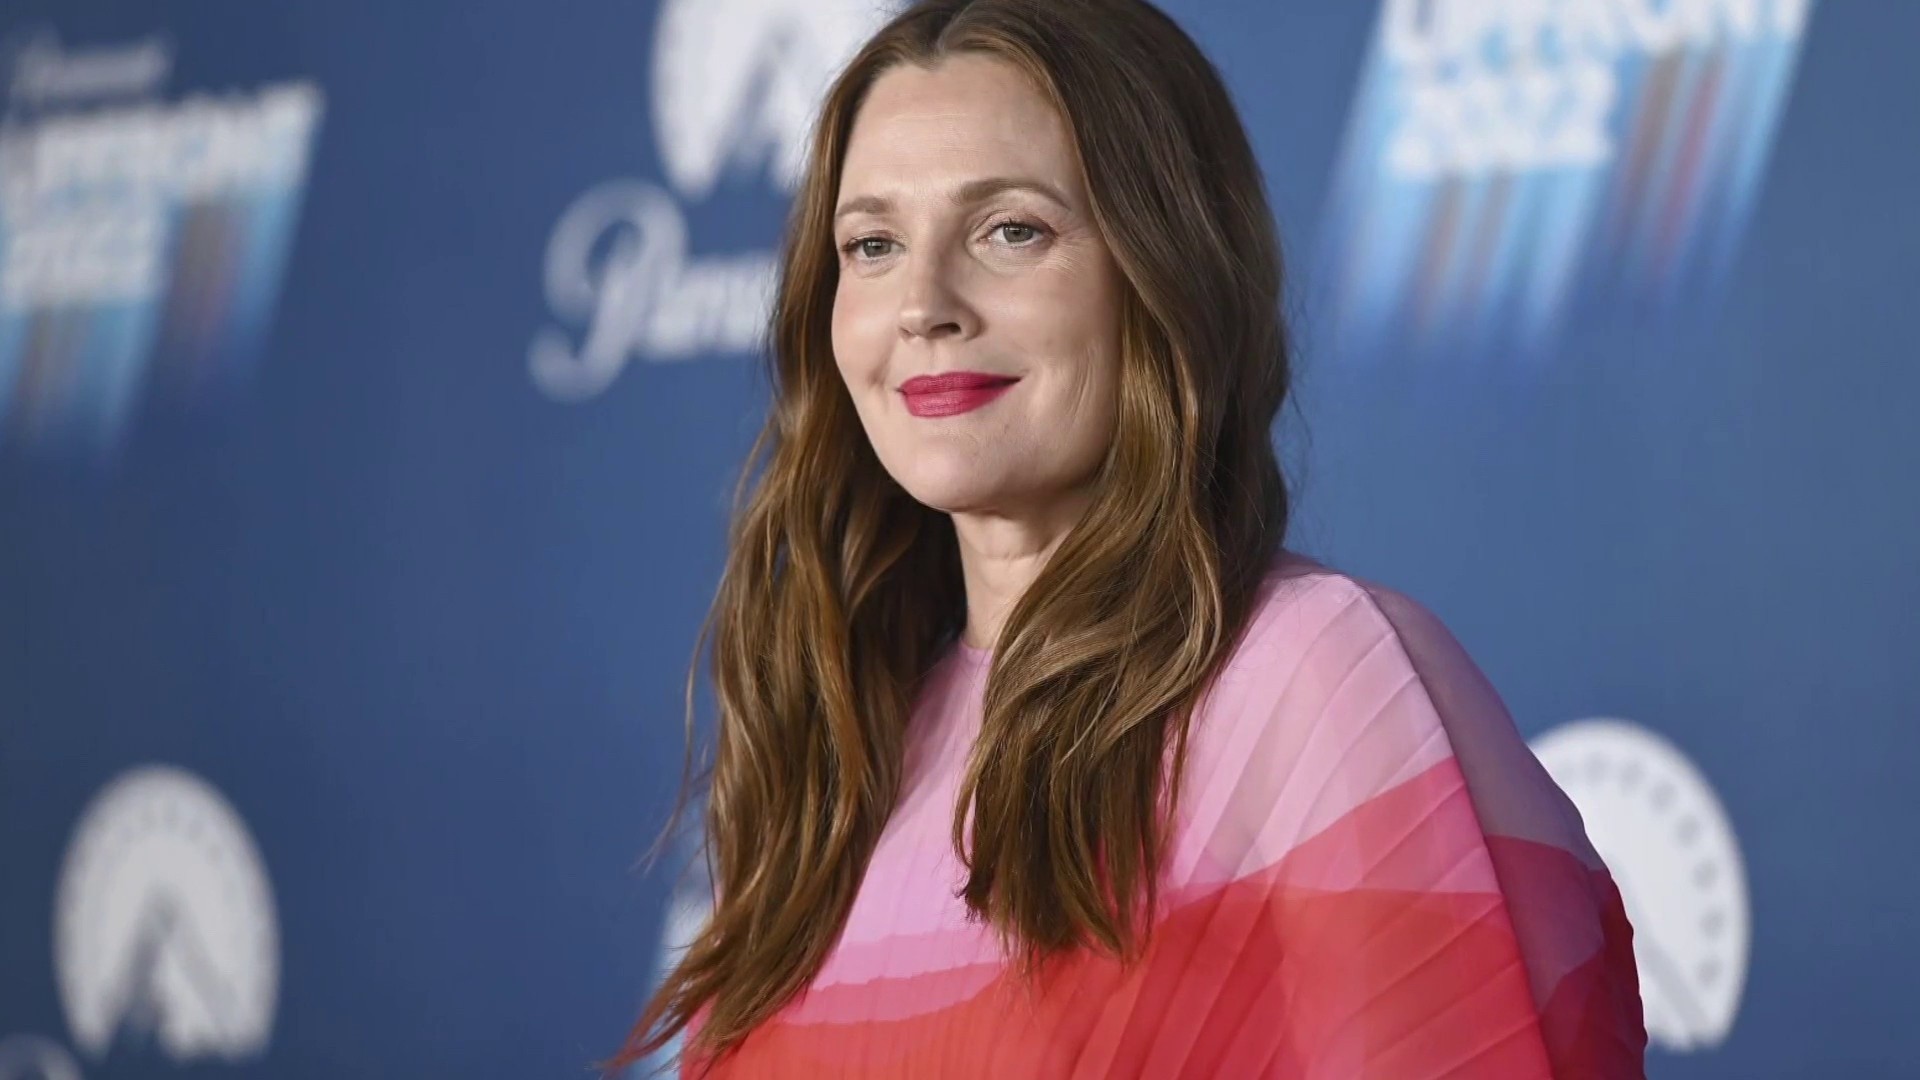 Drew Barrymore reverses course, pausing show for writers' strike